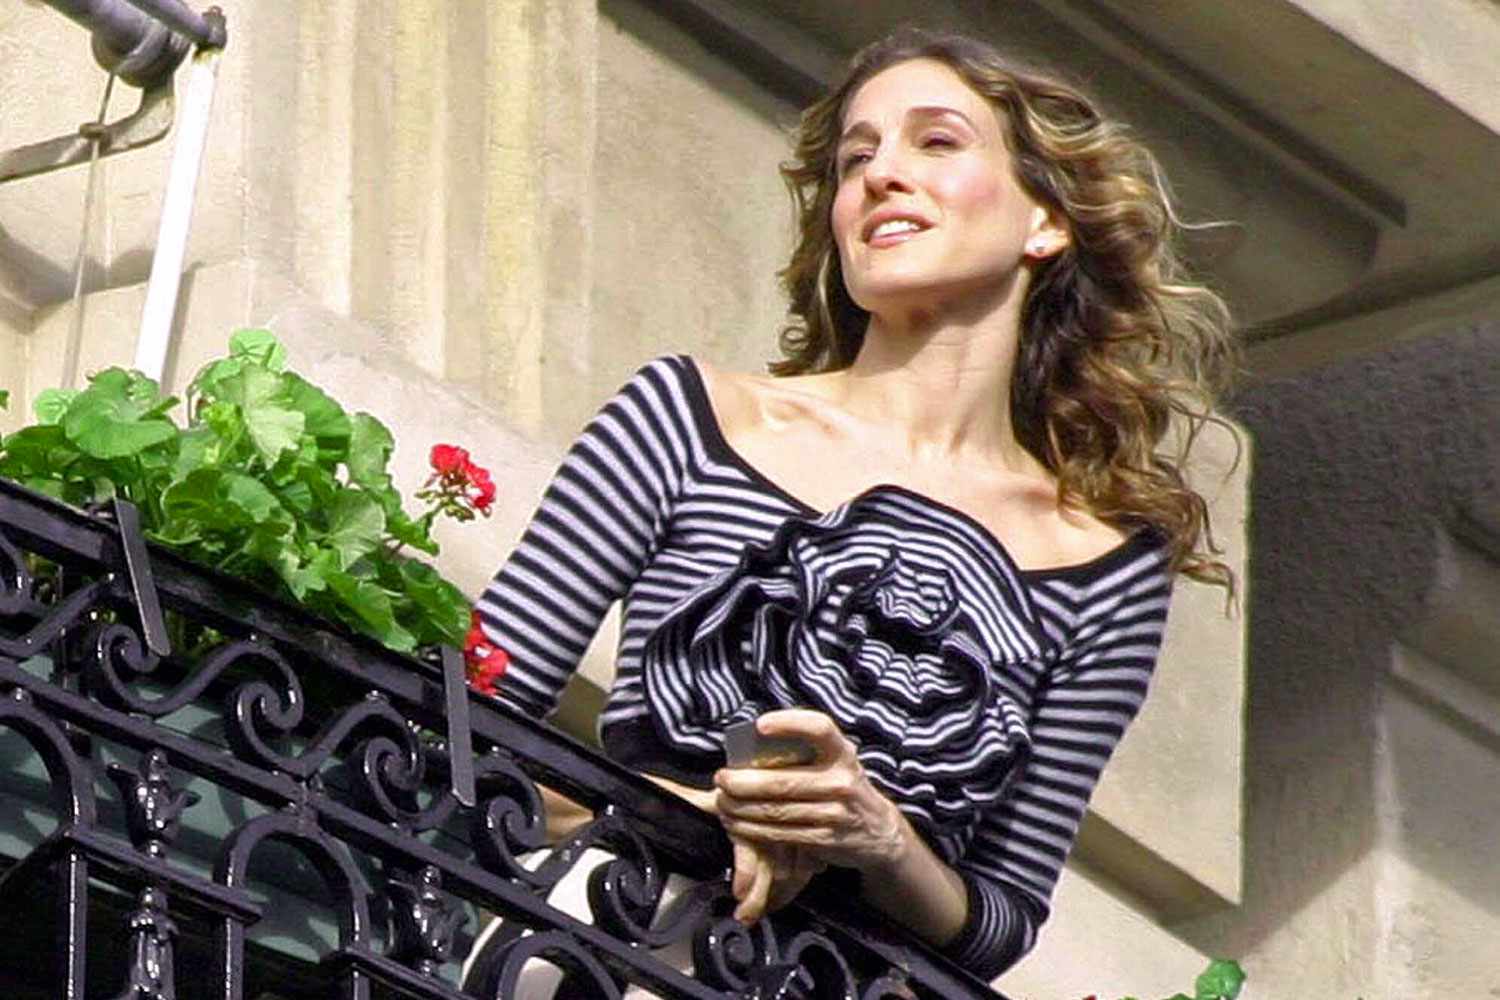 See 20 Fashionable Throwback Photos of Sarah Jessica Parker on the 'Sex and the City' Set